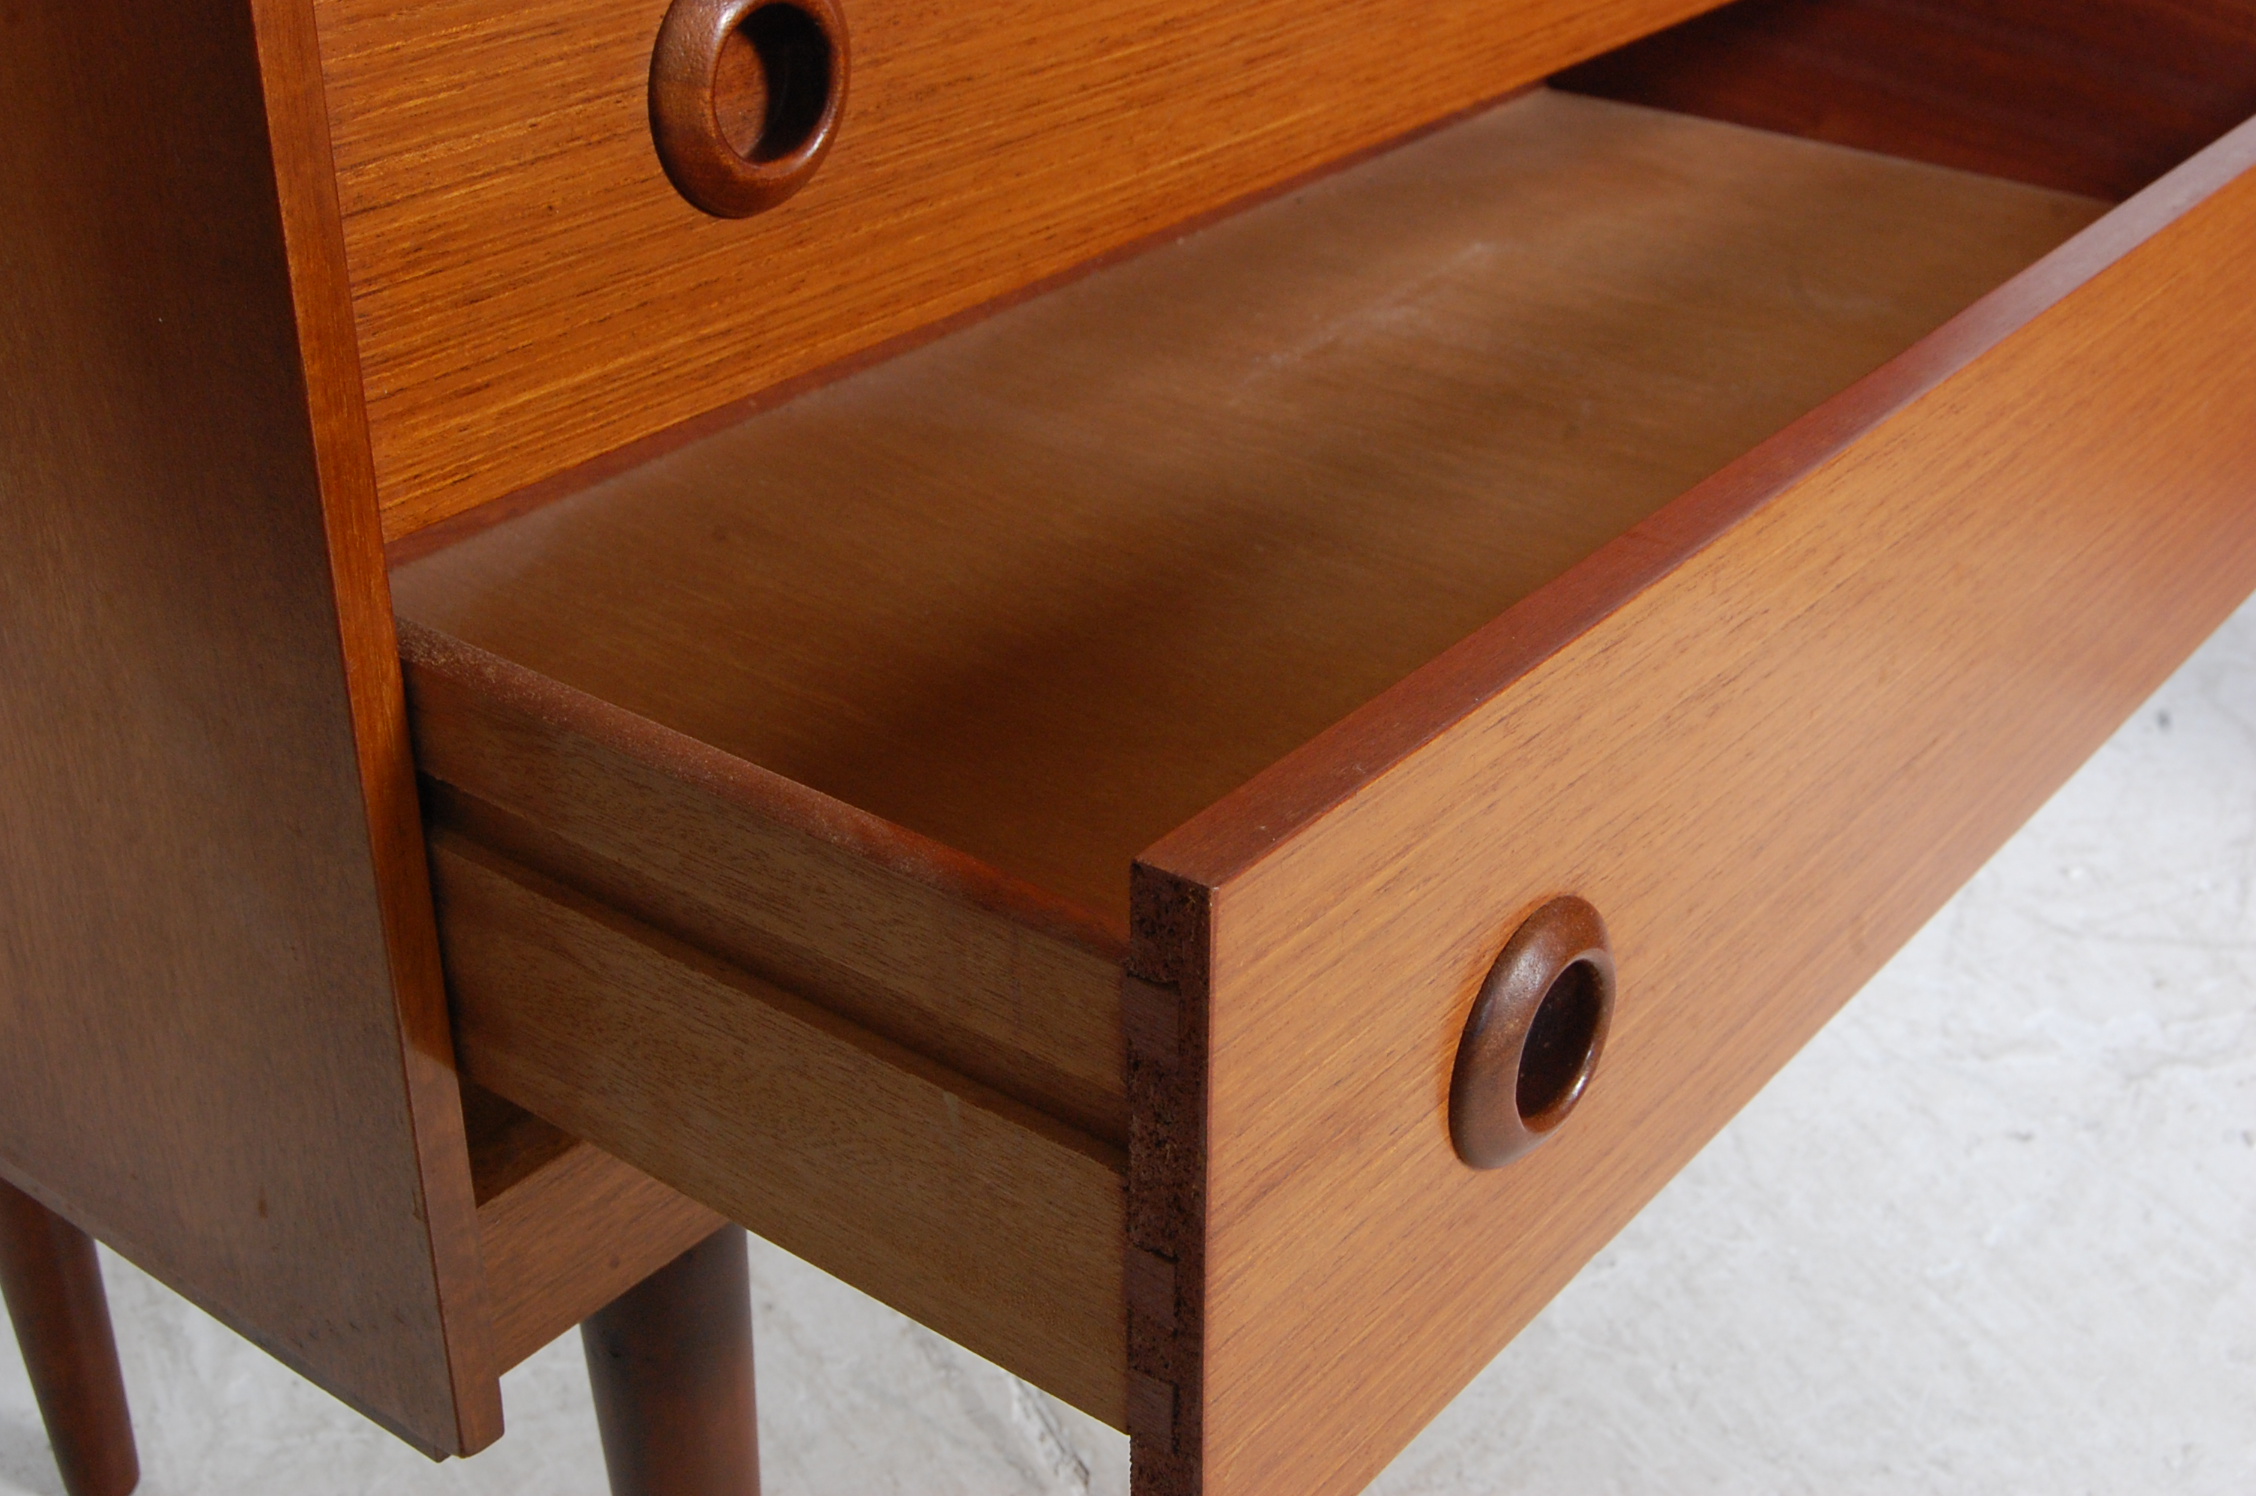 1960’S TEAK WOOD CHEST OF DRAWERS BY SCHREIBER - Image 4 of 4